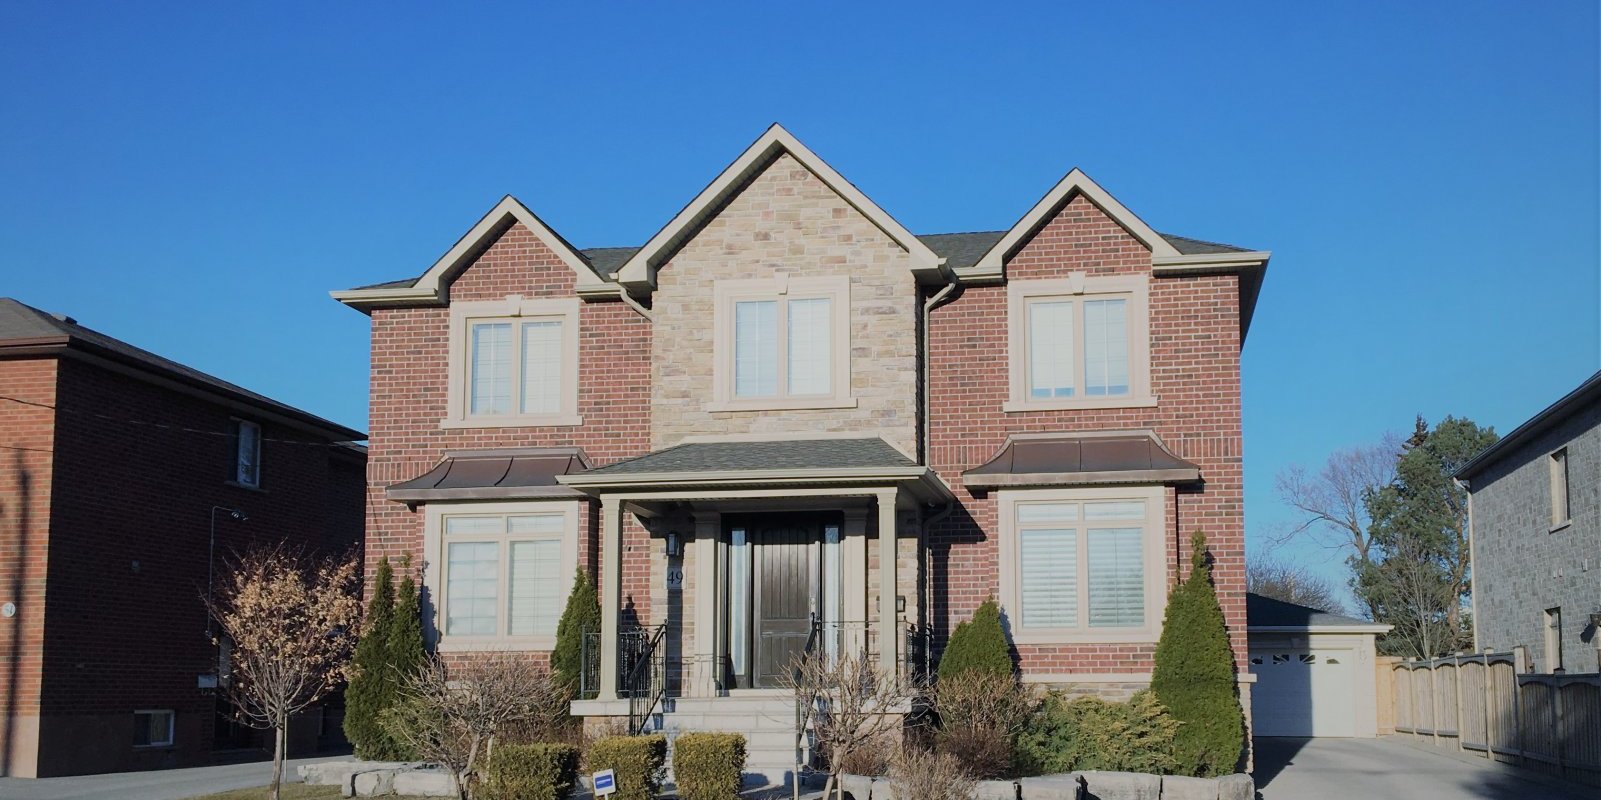 Sell-My house Fast in North York.